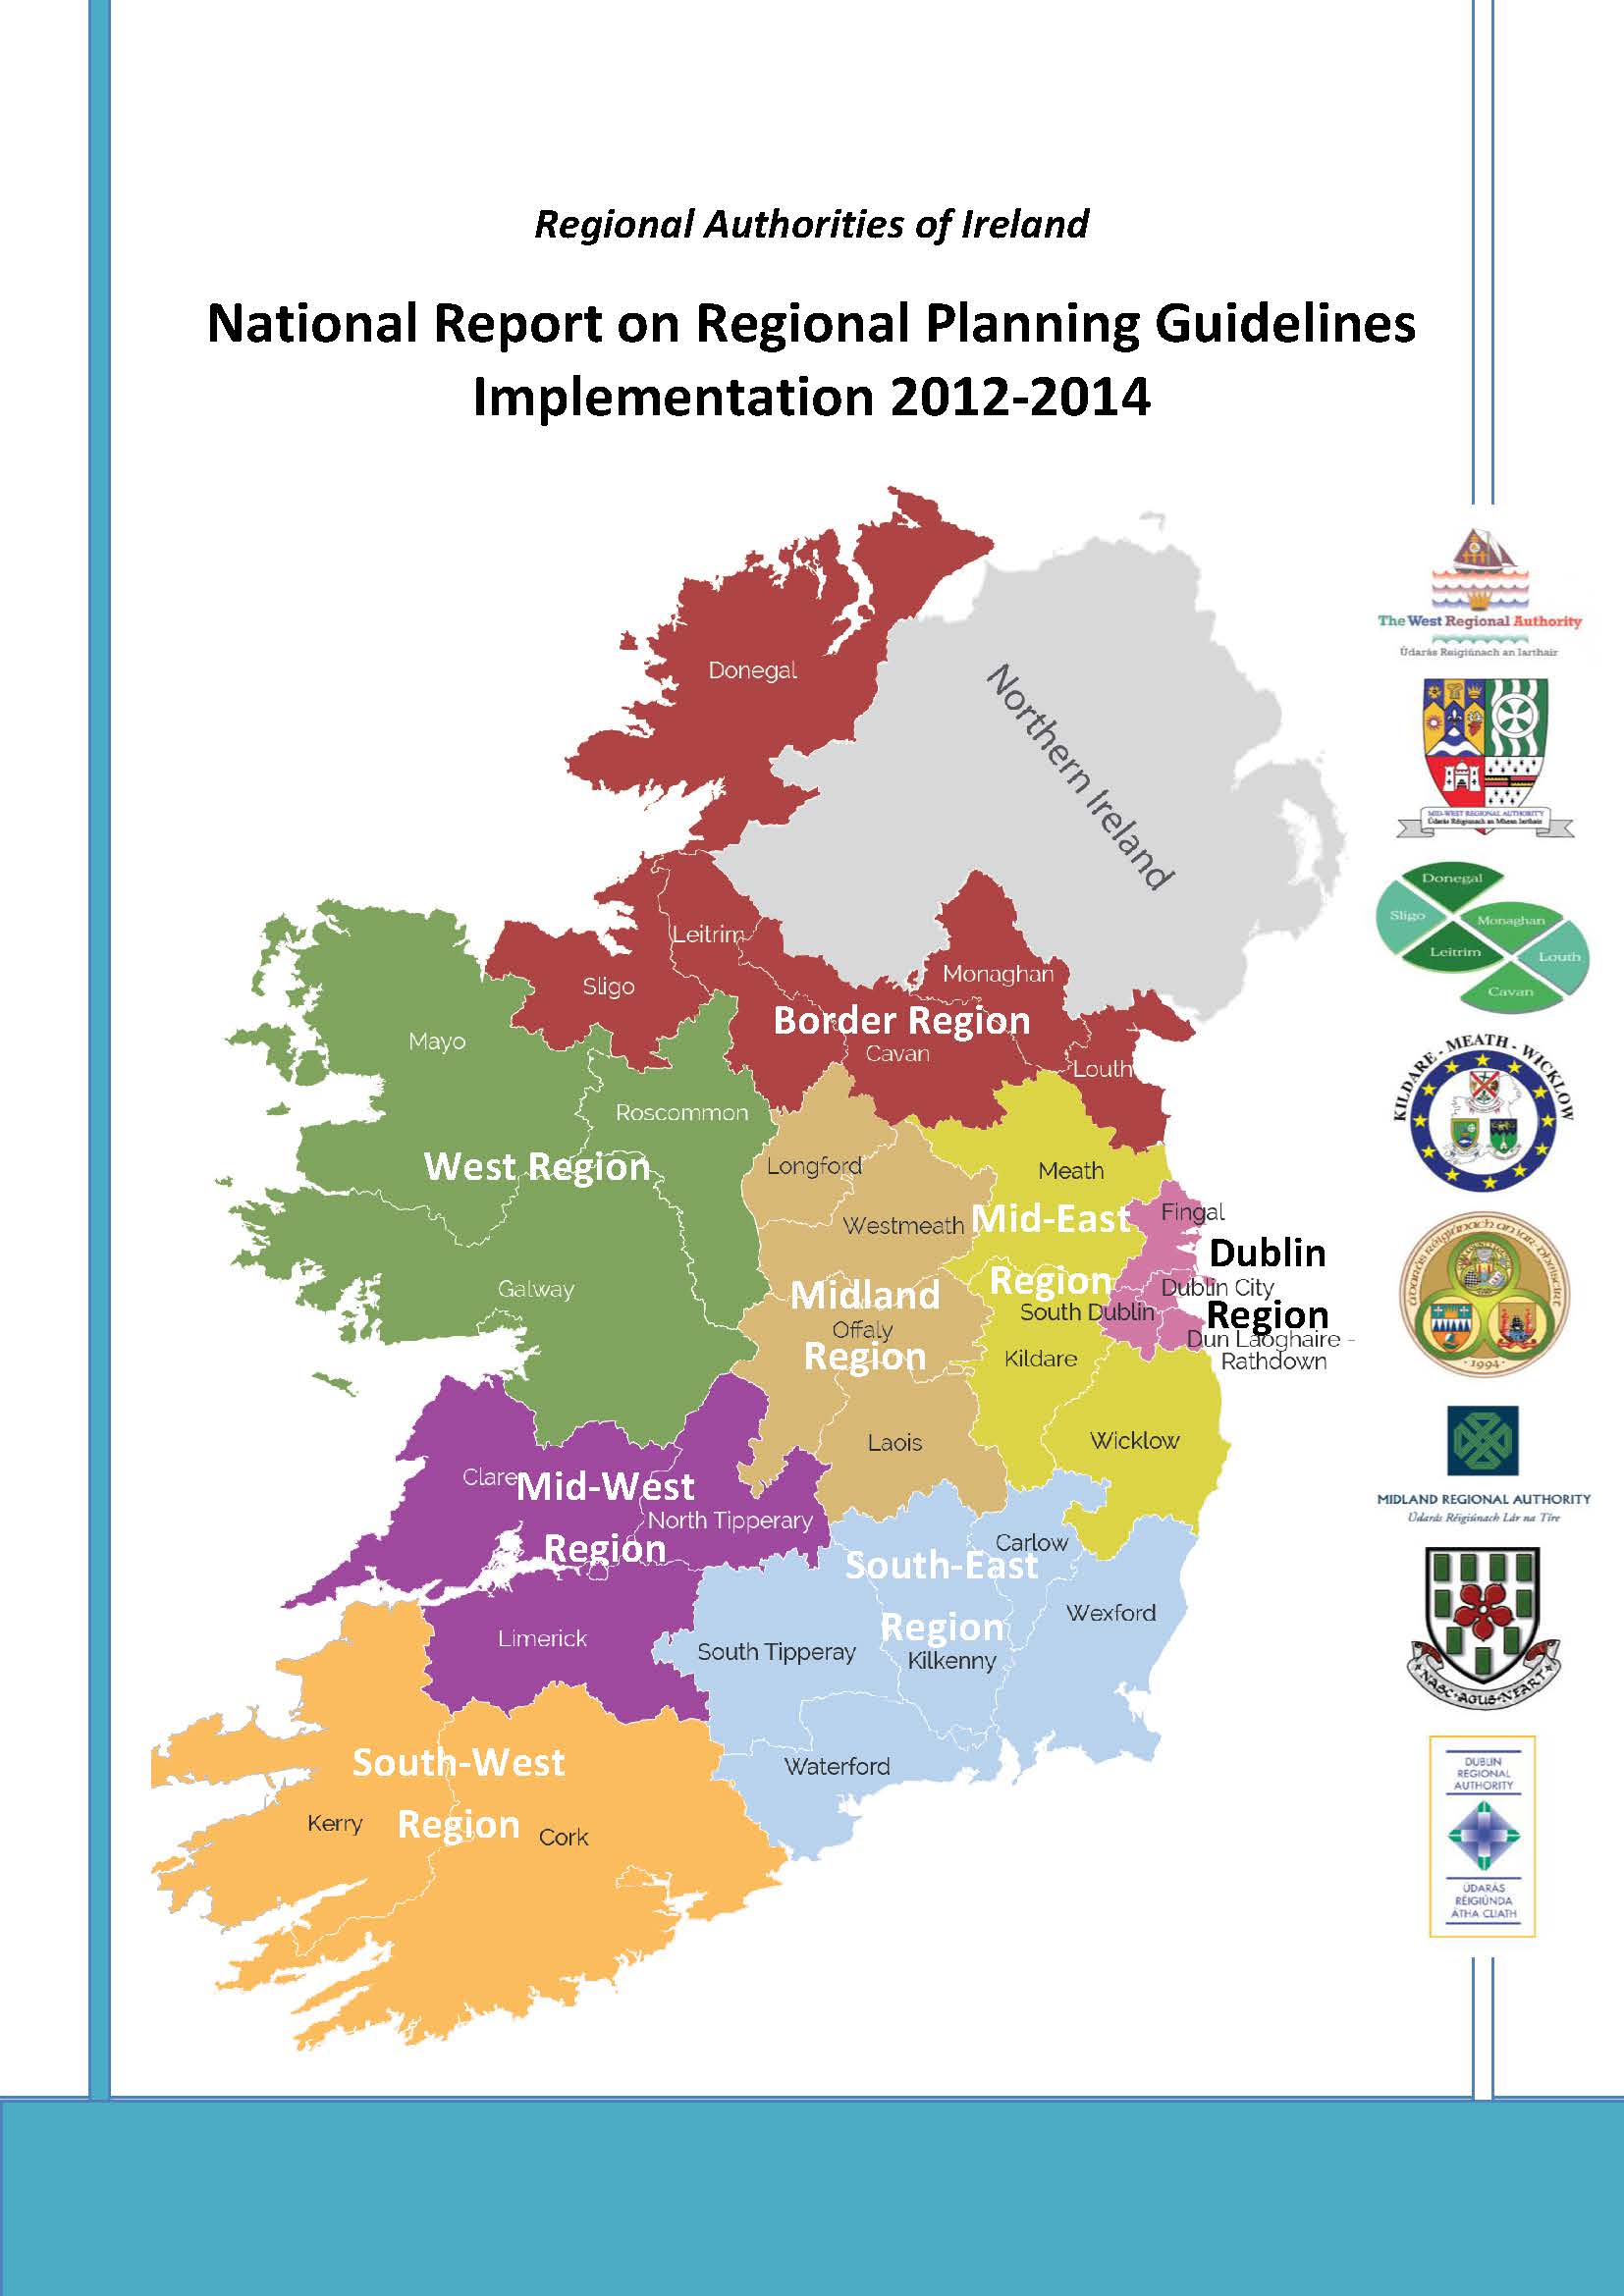 Regional-Planning-Guidelines-Implementation-Report-2012-14 pic